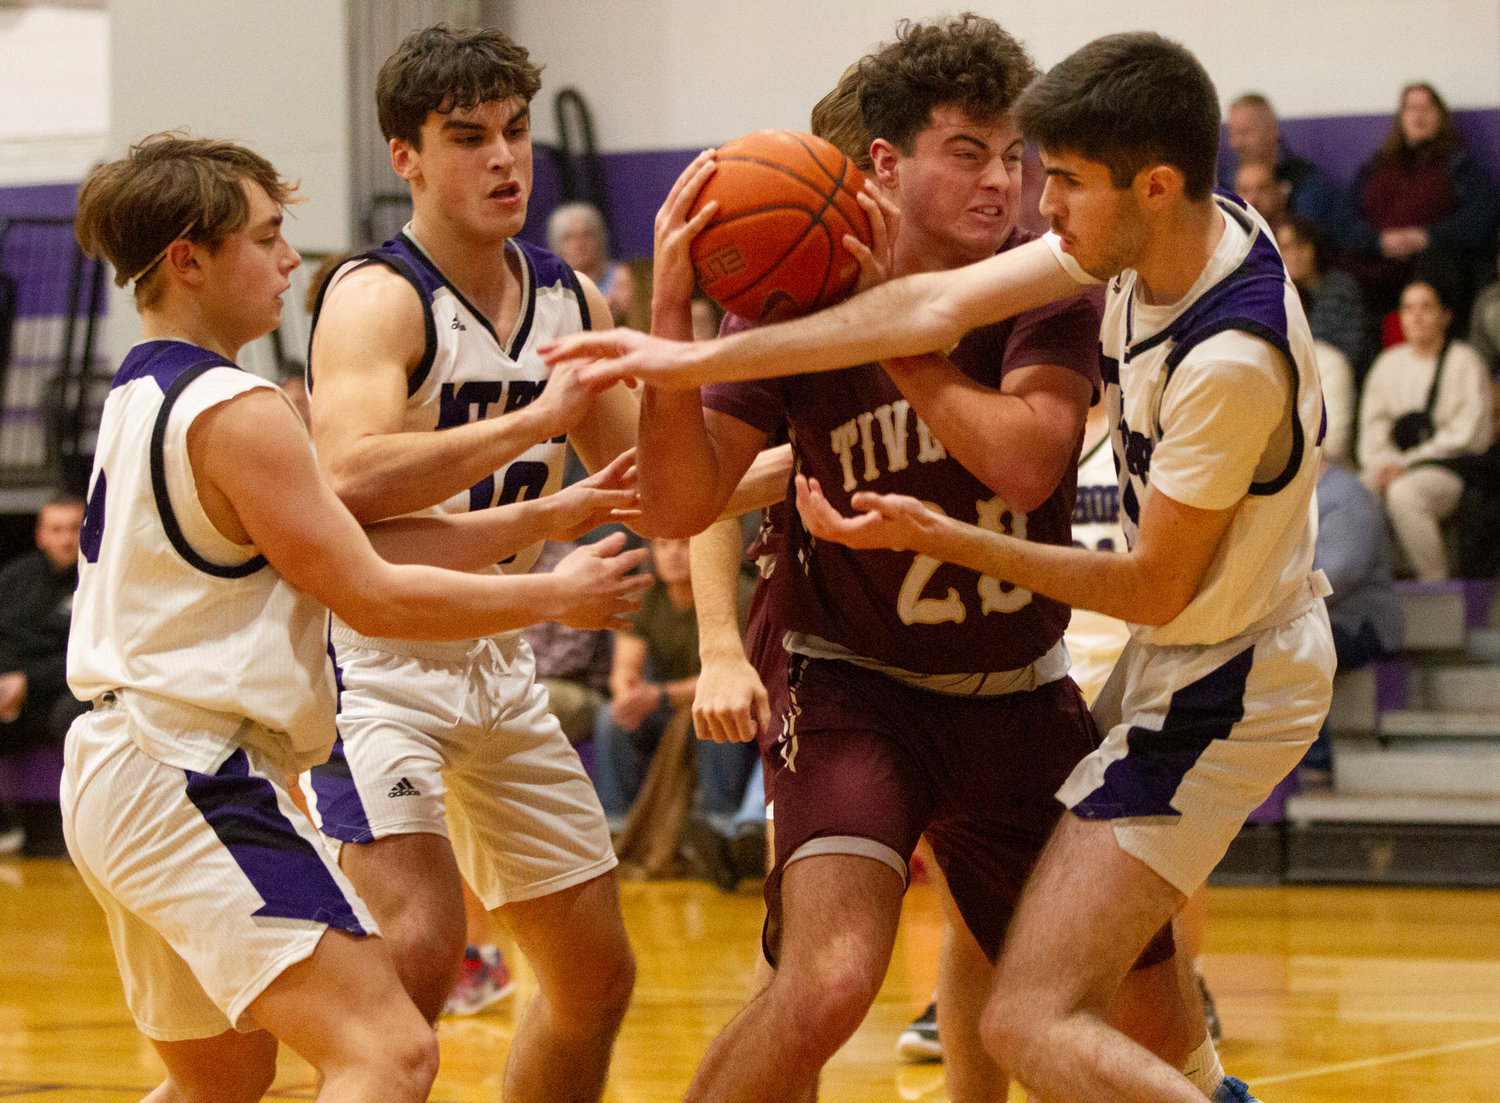 Huskies defenders Matt MacDougall, Ben Calouro and James Rustici (from left) fight for a rebound with Tiverton’s Ryan Poland in a physical Division II matchup at Mt. Hope High School on Thursday night. Tiverton won the game, 56-42.